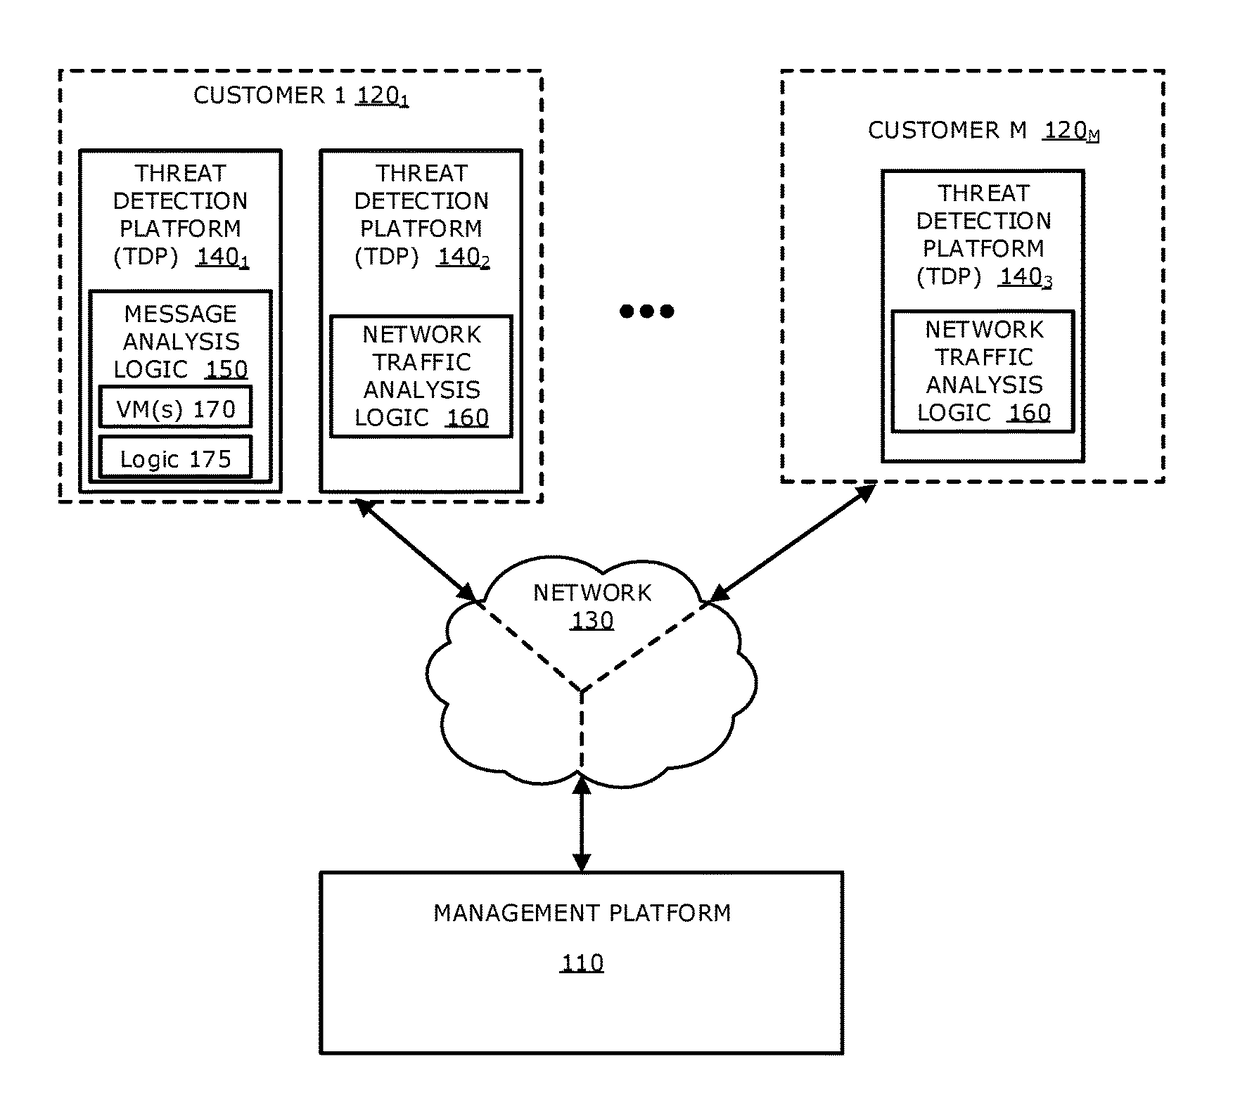 System and method of detecting delivery of malware based on indicators of compromise from different sources